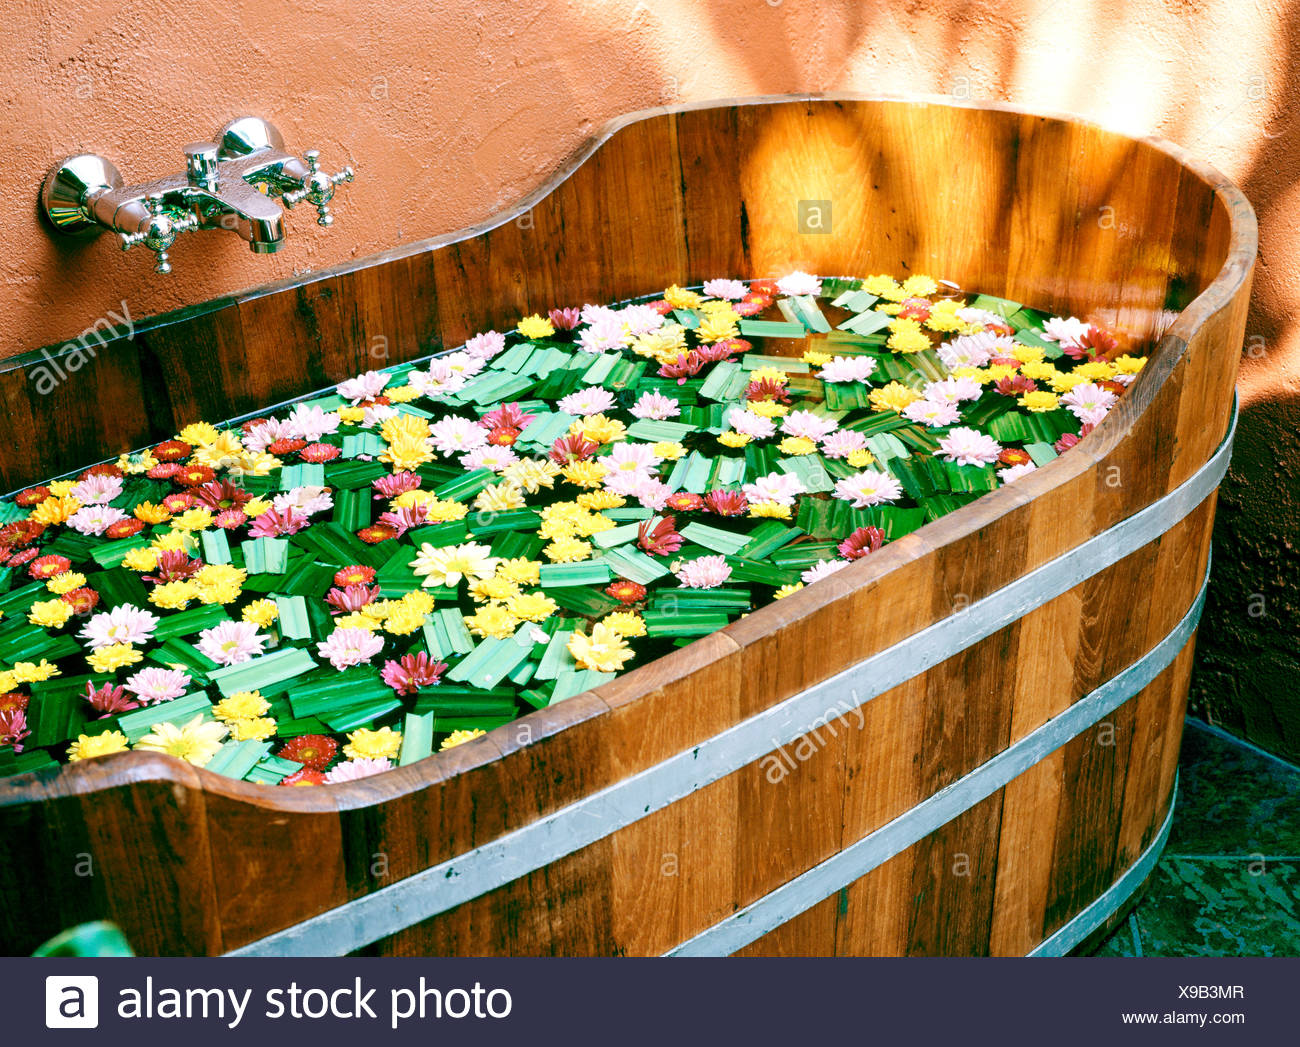 A Wooden Bathtub Filled With Flowers And Aromatic Herbs In